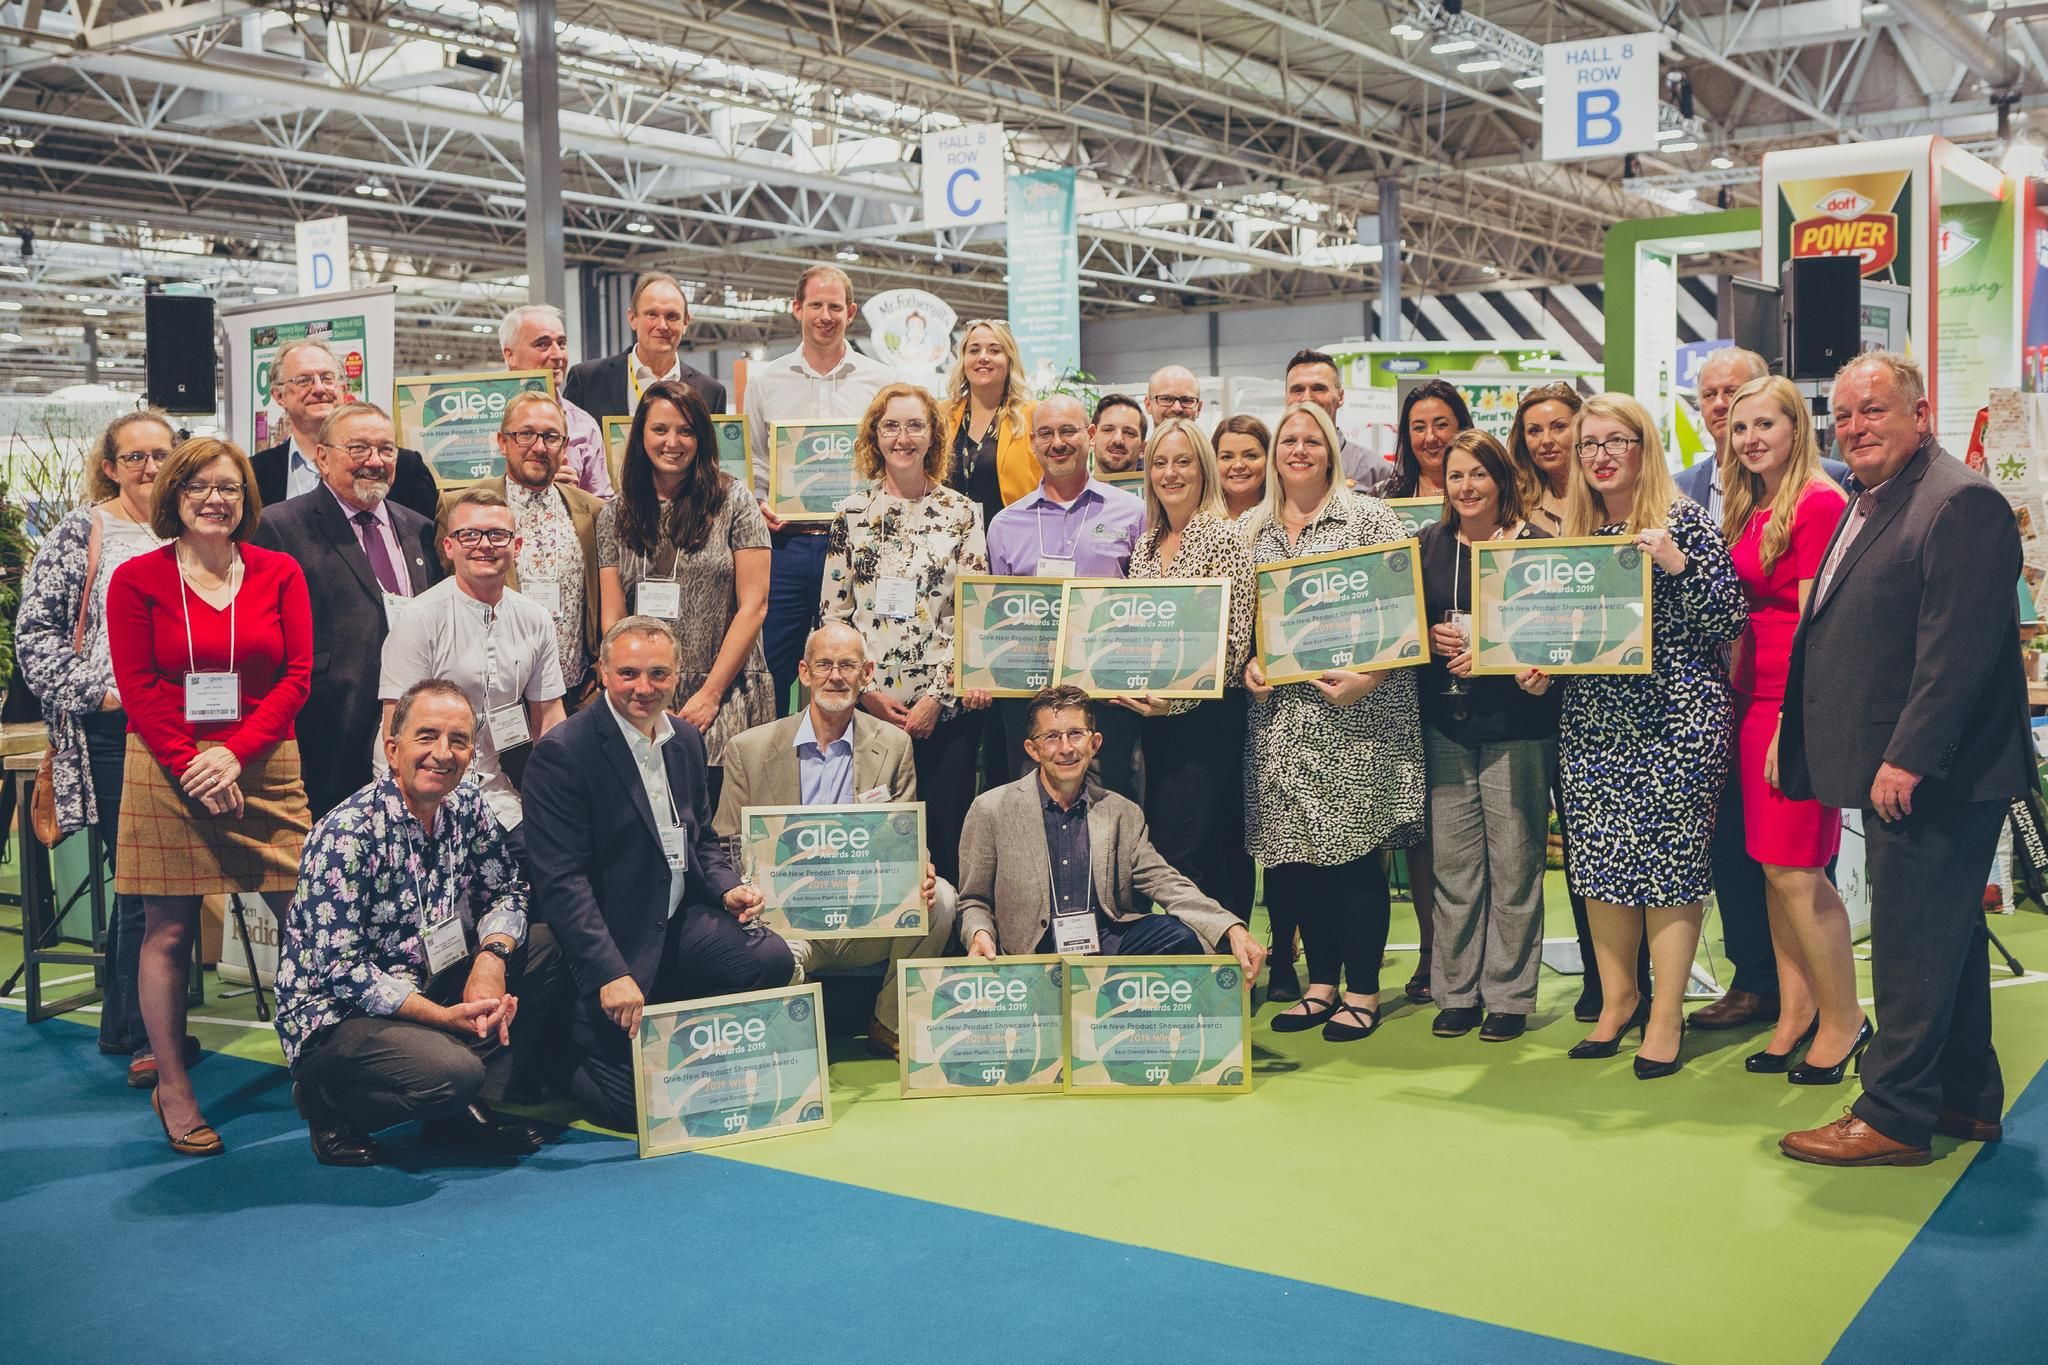 The Glee New Product Showcase 2019 winners are revealed